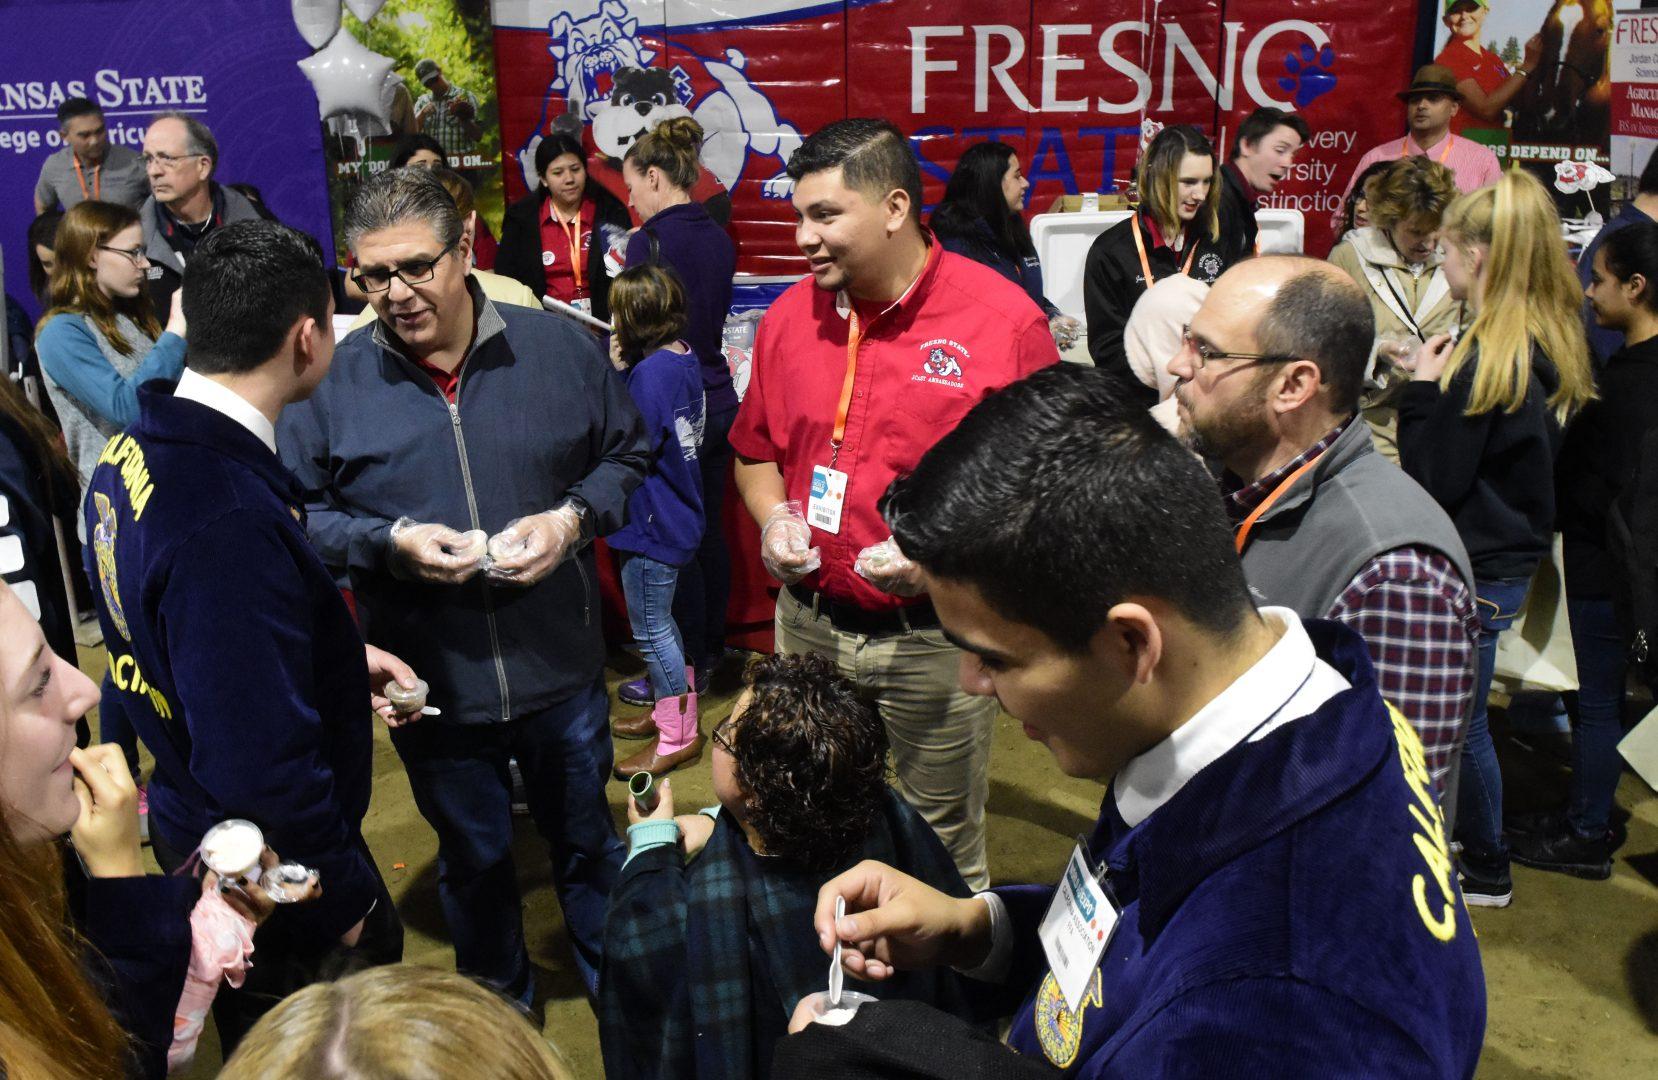 Fresno+State+president+Dr.+Joseph+I.+Castro+and+ag+ambassador+Omar+Hernandez+hand+out+Fresno+State+ice+cream+at+the+World+Ag+Expo+in+Tulare+on+Feb.+14%2C+2019.+%28Geoff+Thurner%2F+Jordan+College+of+Agricultural+Sciences+and+Technology%29